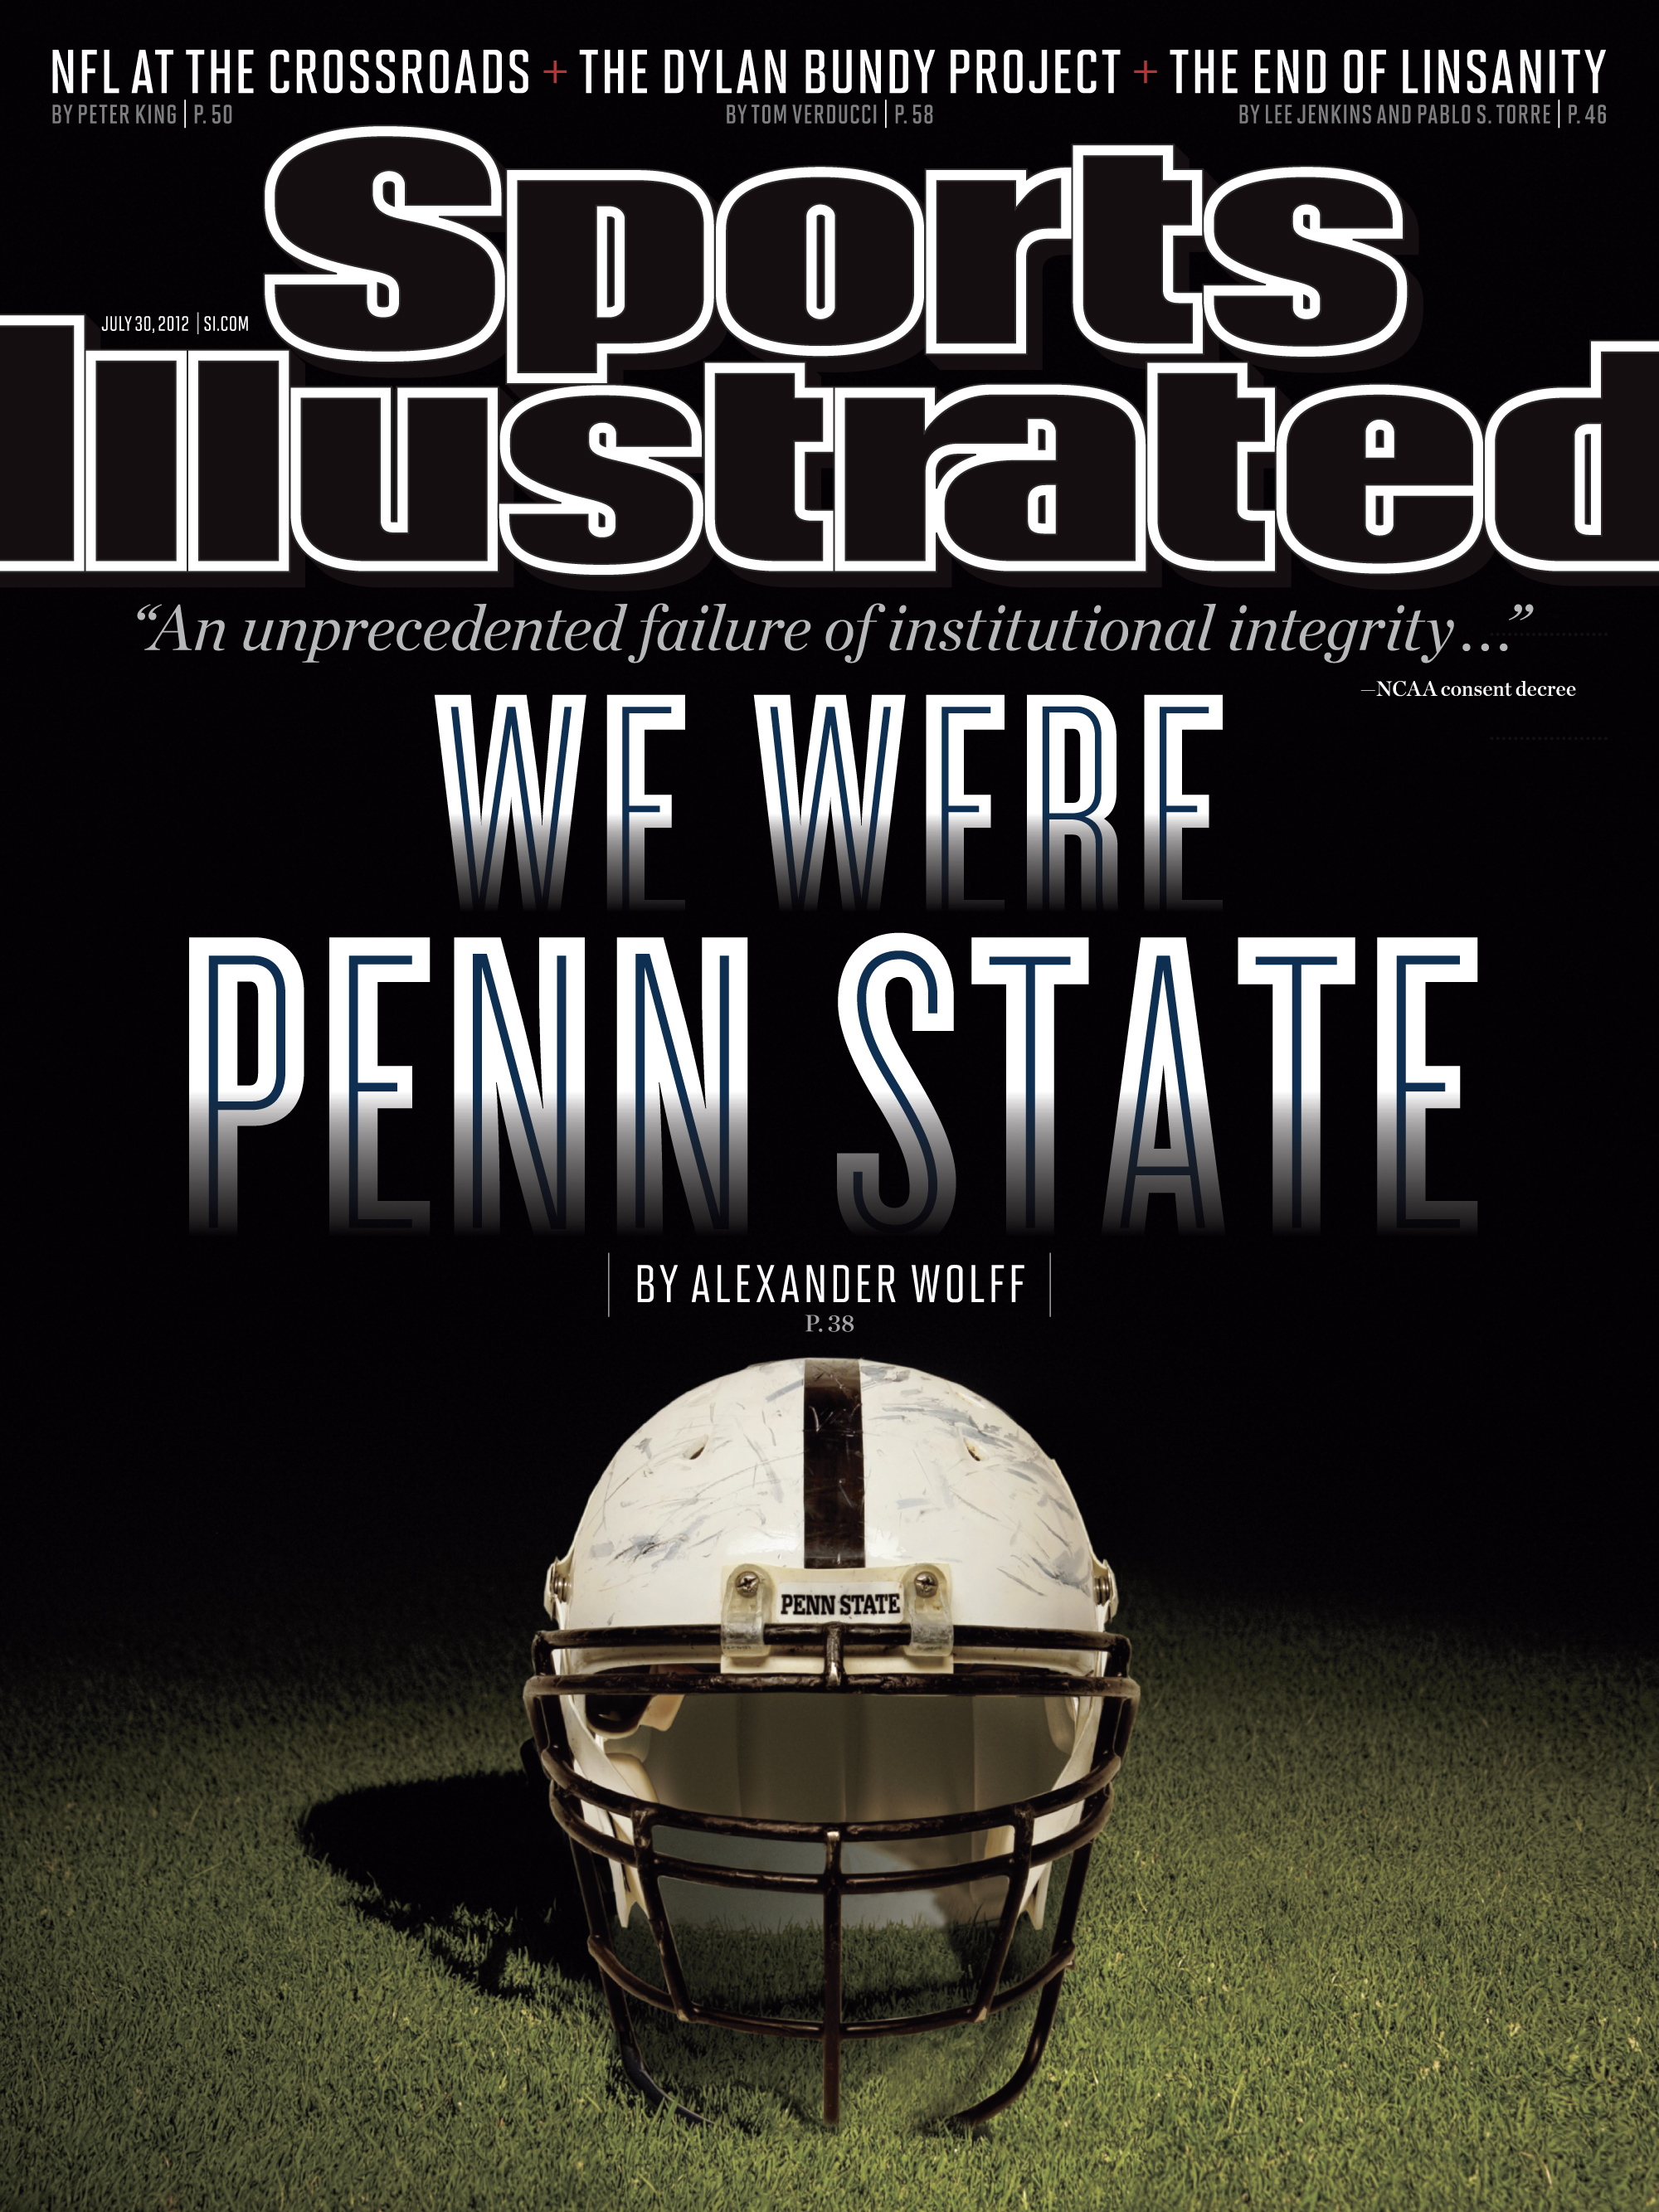 Sports Illustrated-July 30, 2012: "We Were Penn State"